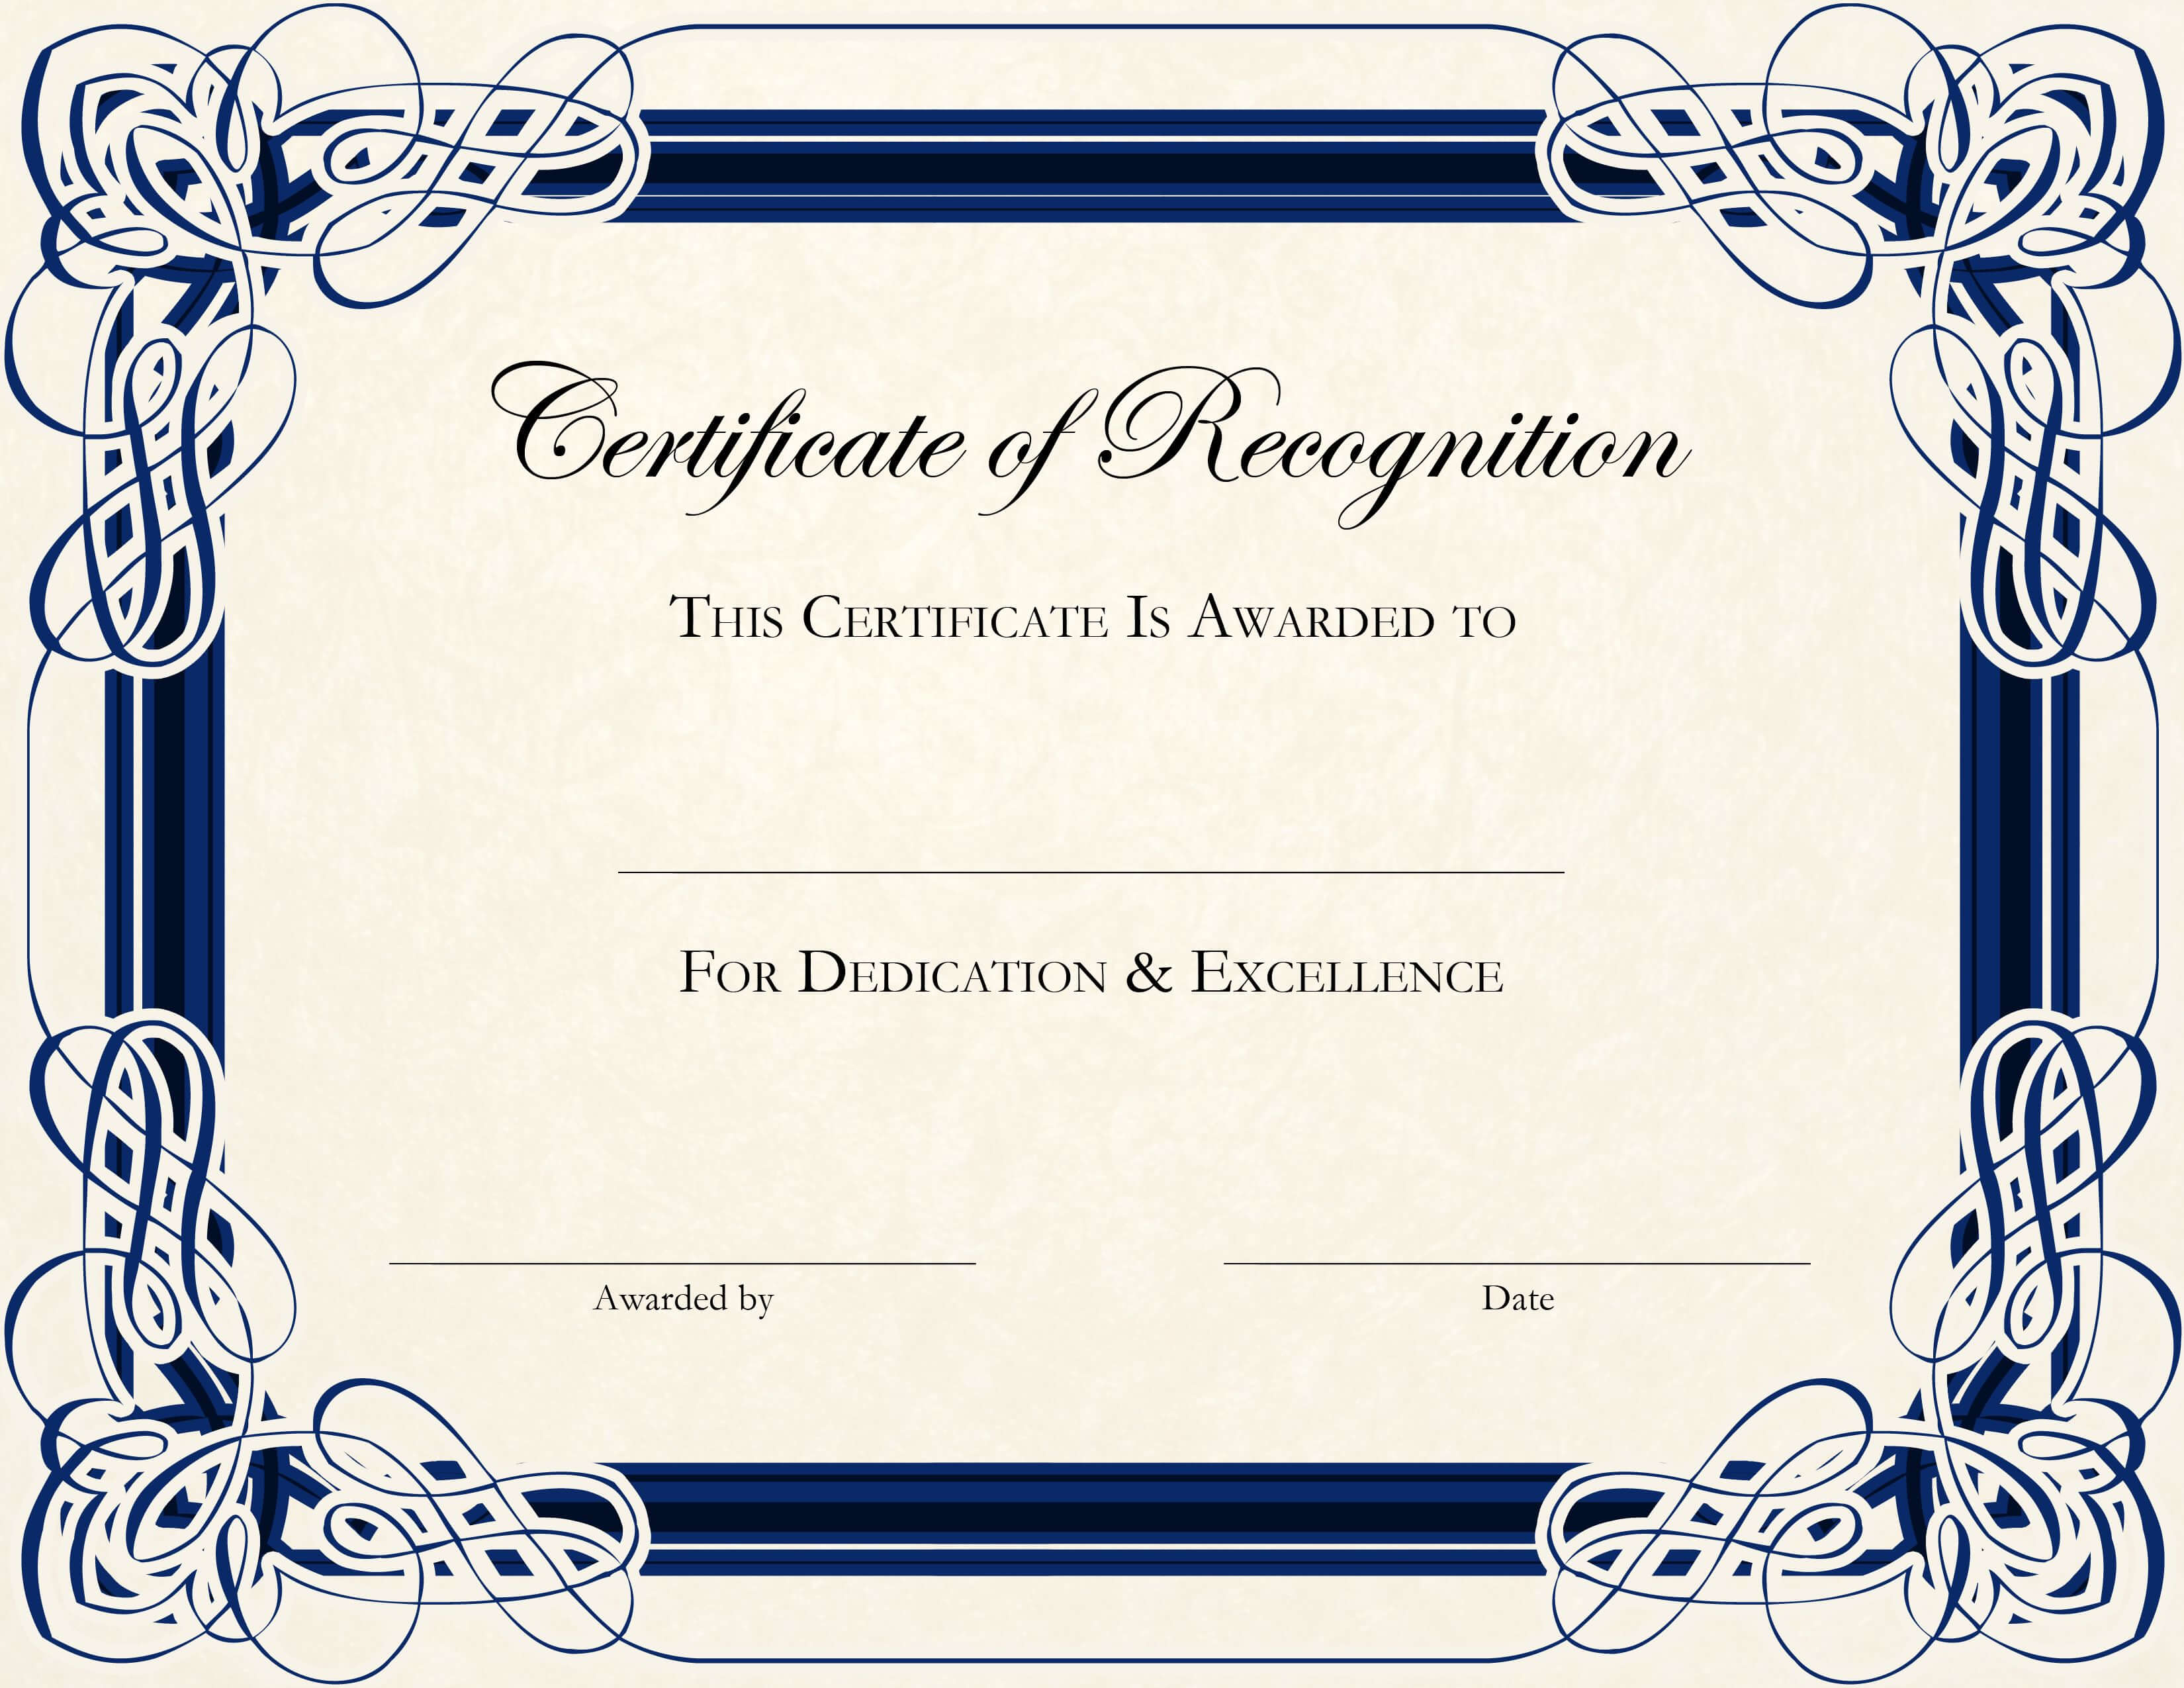 Certificate Template Designs Recognition Docs | Blankets For Free Art Certificate Templates